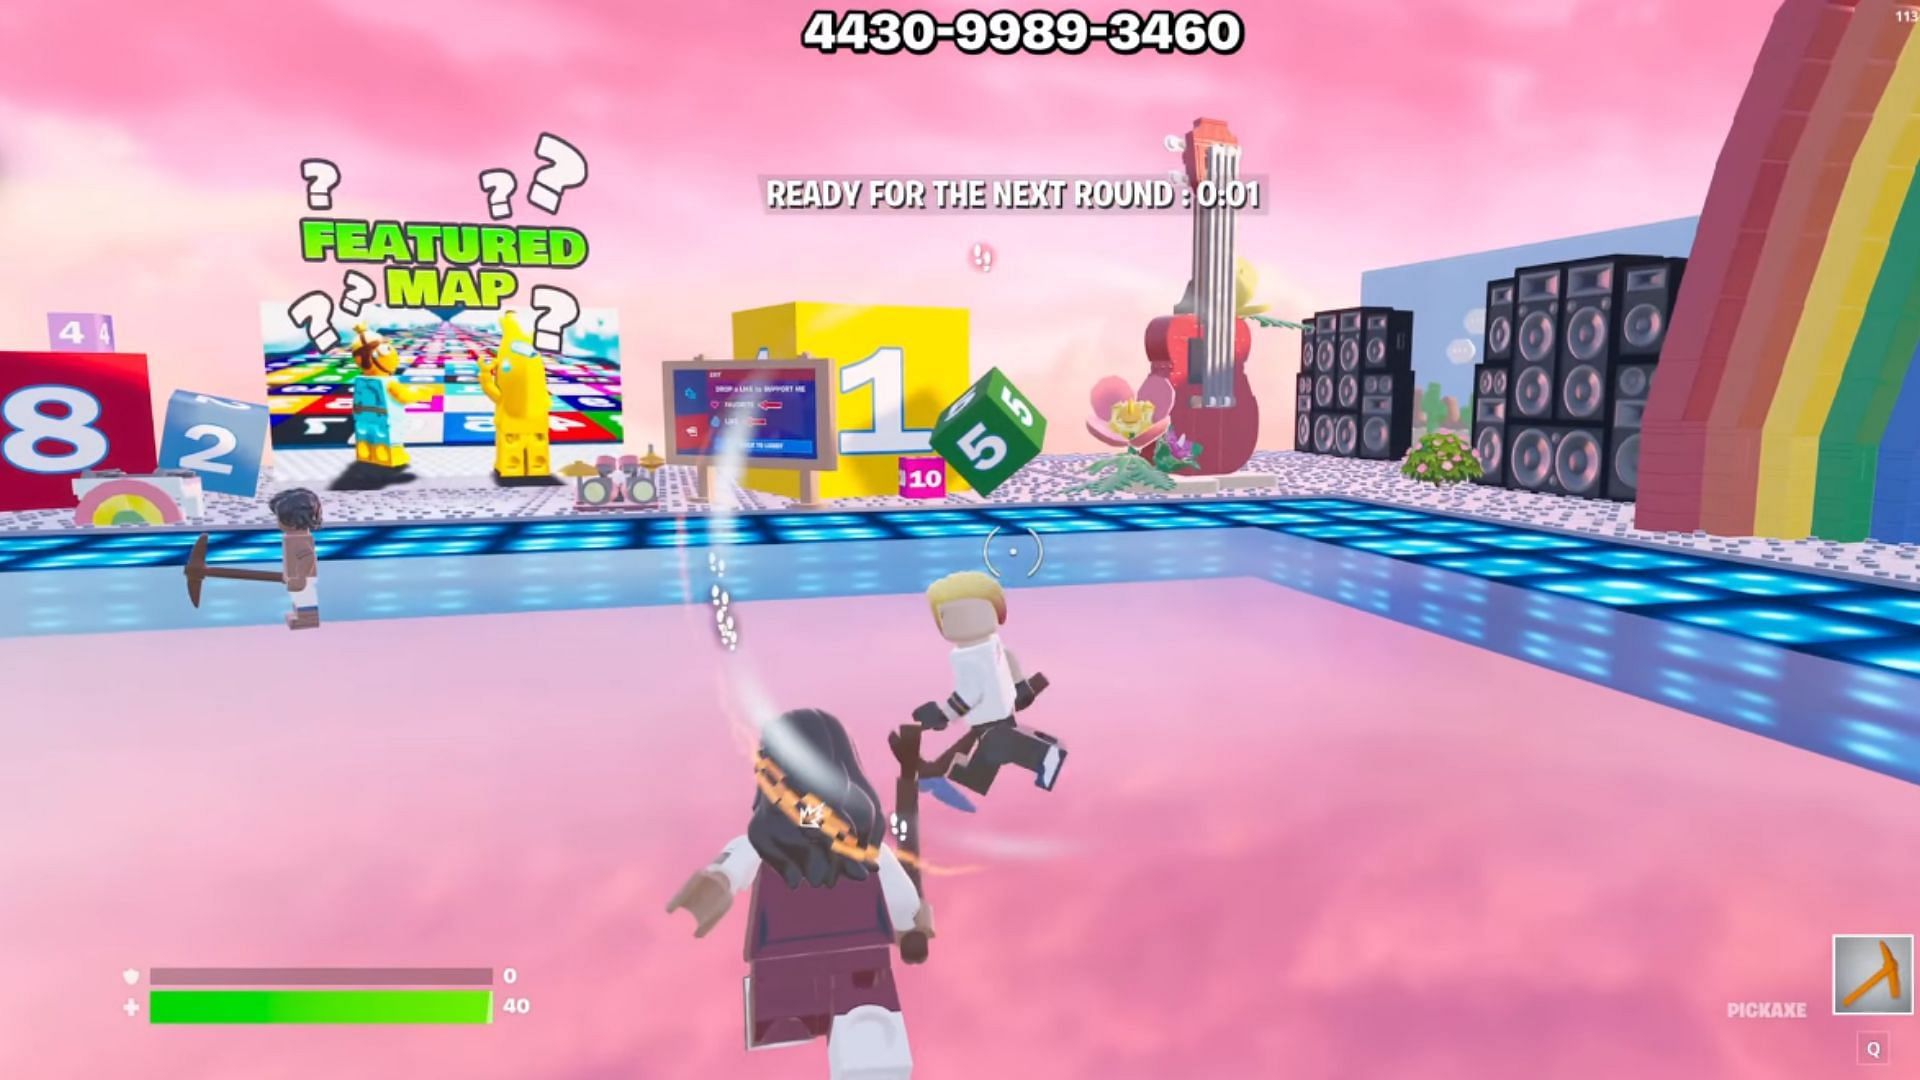 Players can compete against up to 16 players in the LEGO Block Floor Is Lava map. (Image via MBT on YouTube)